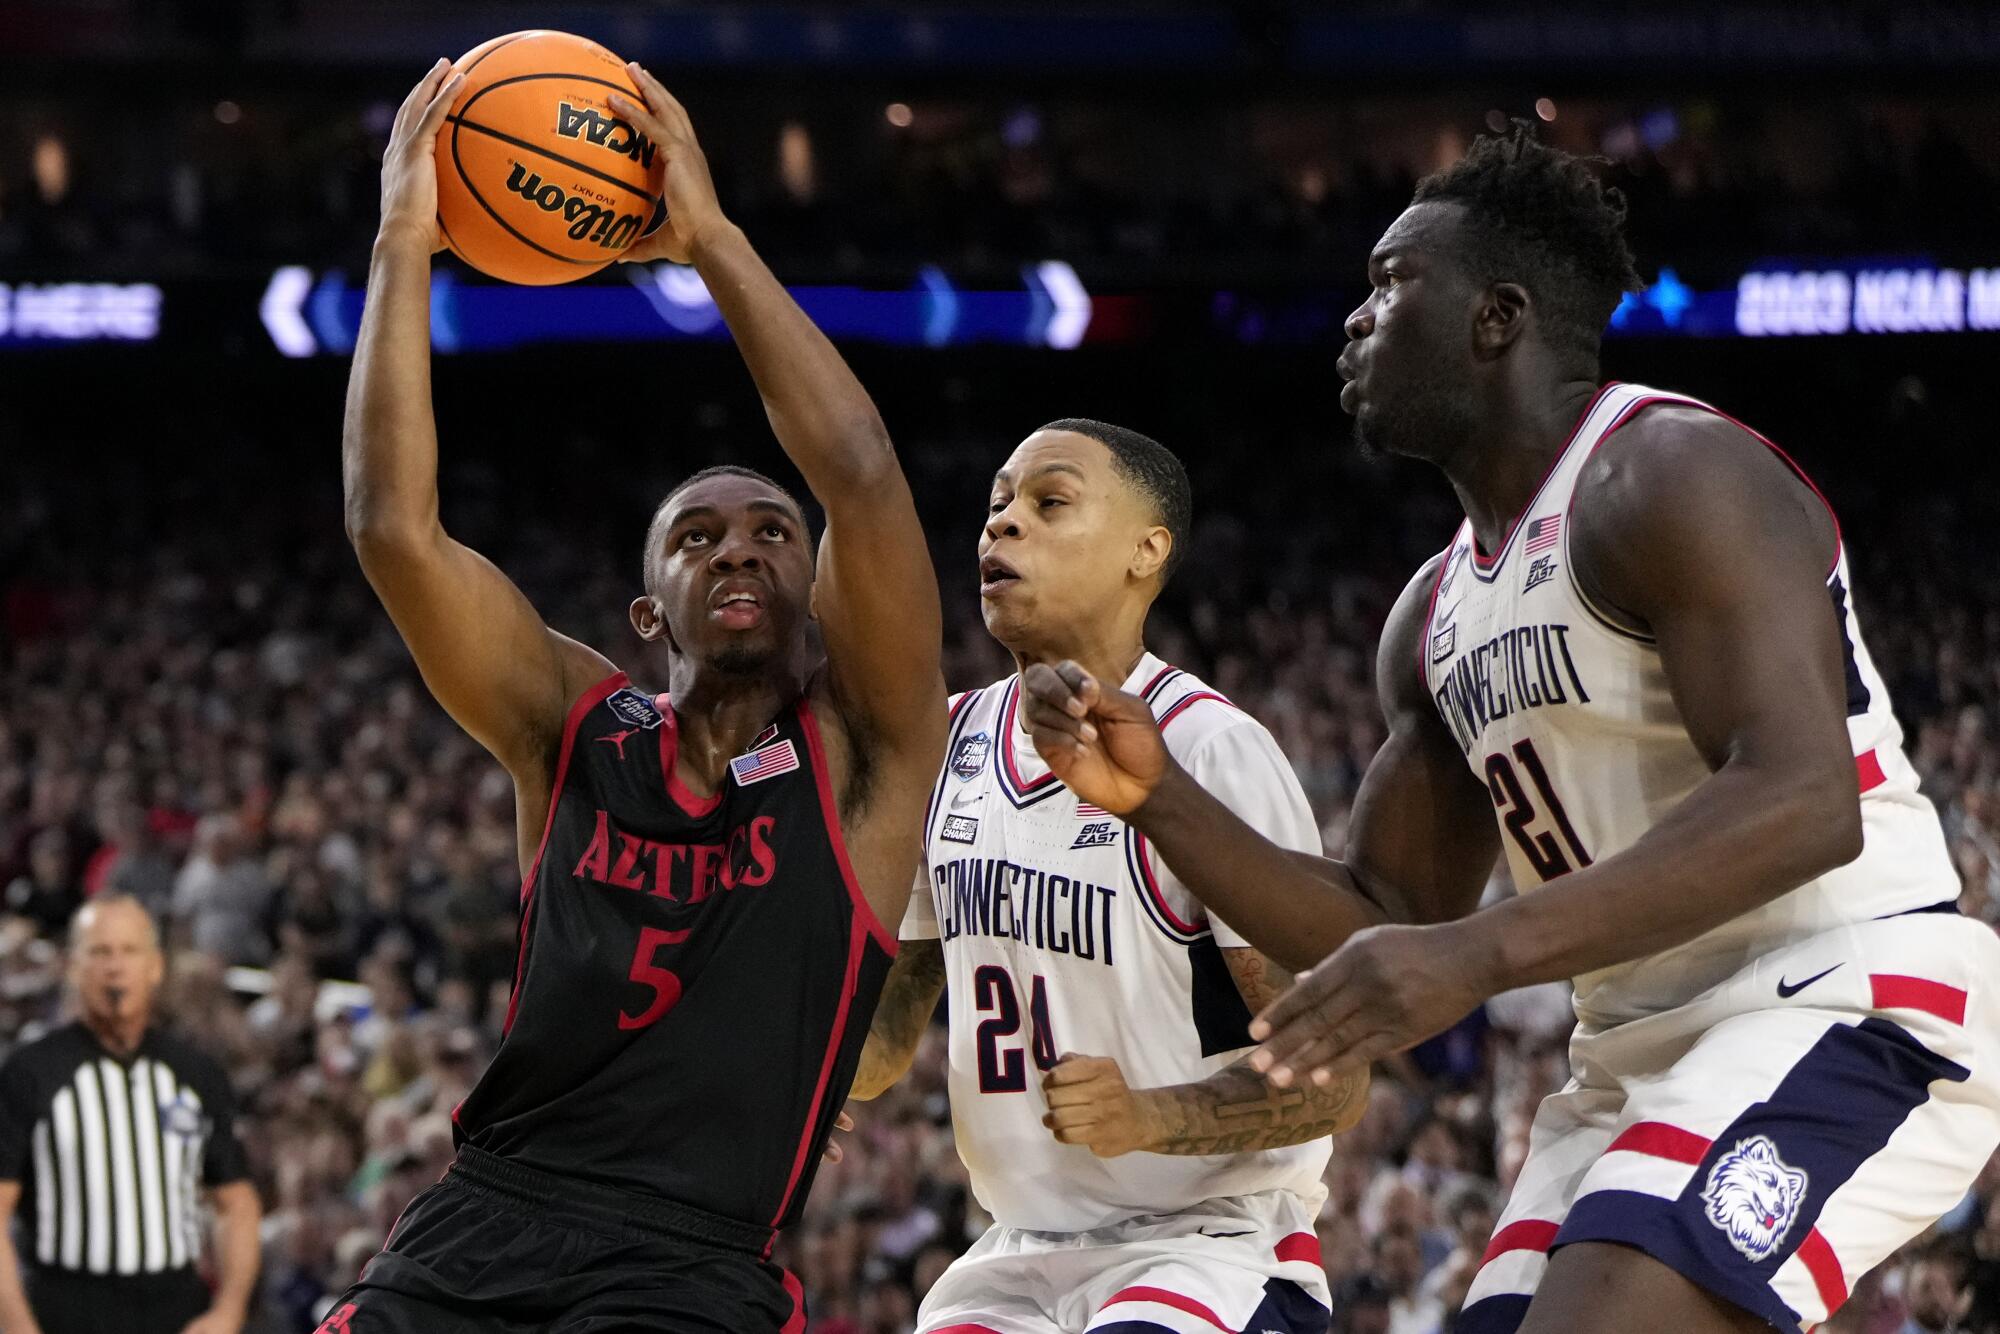 San Diego State guard Lamont Butler drives as UConn guard Jordan Hawkins defends during the 2023 national championship